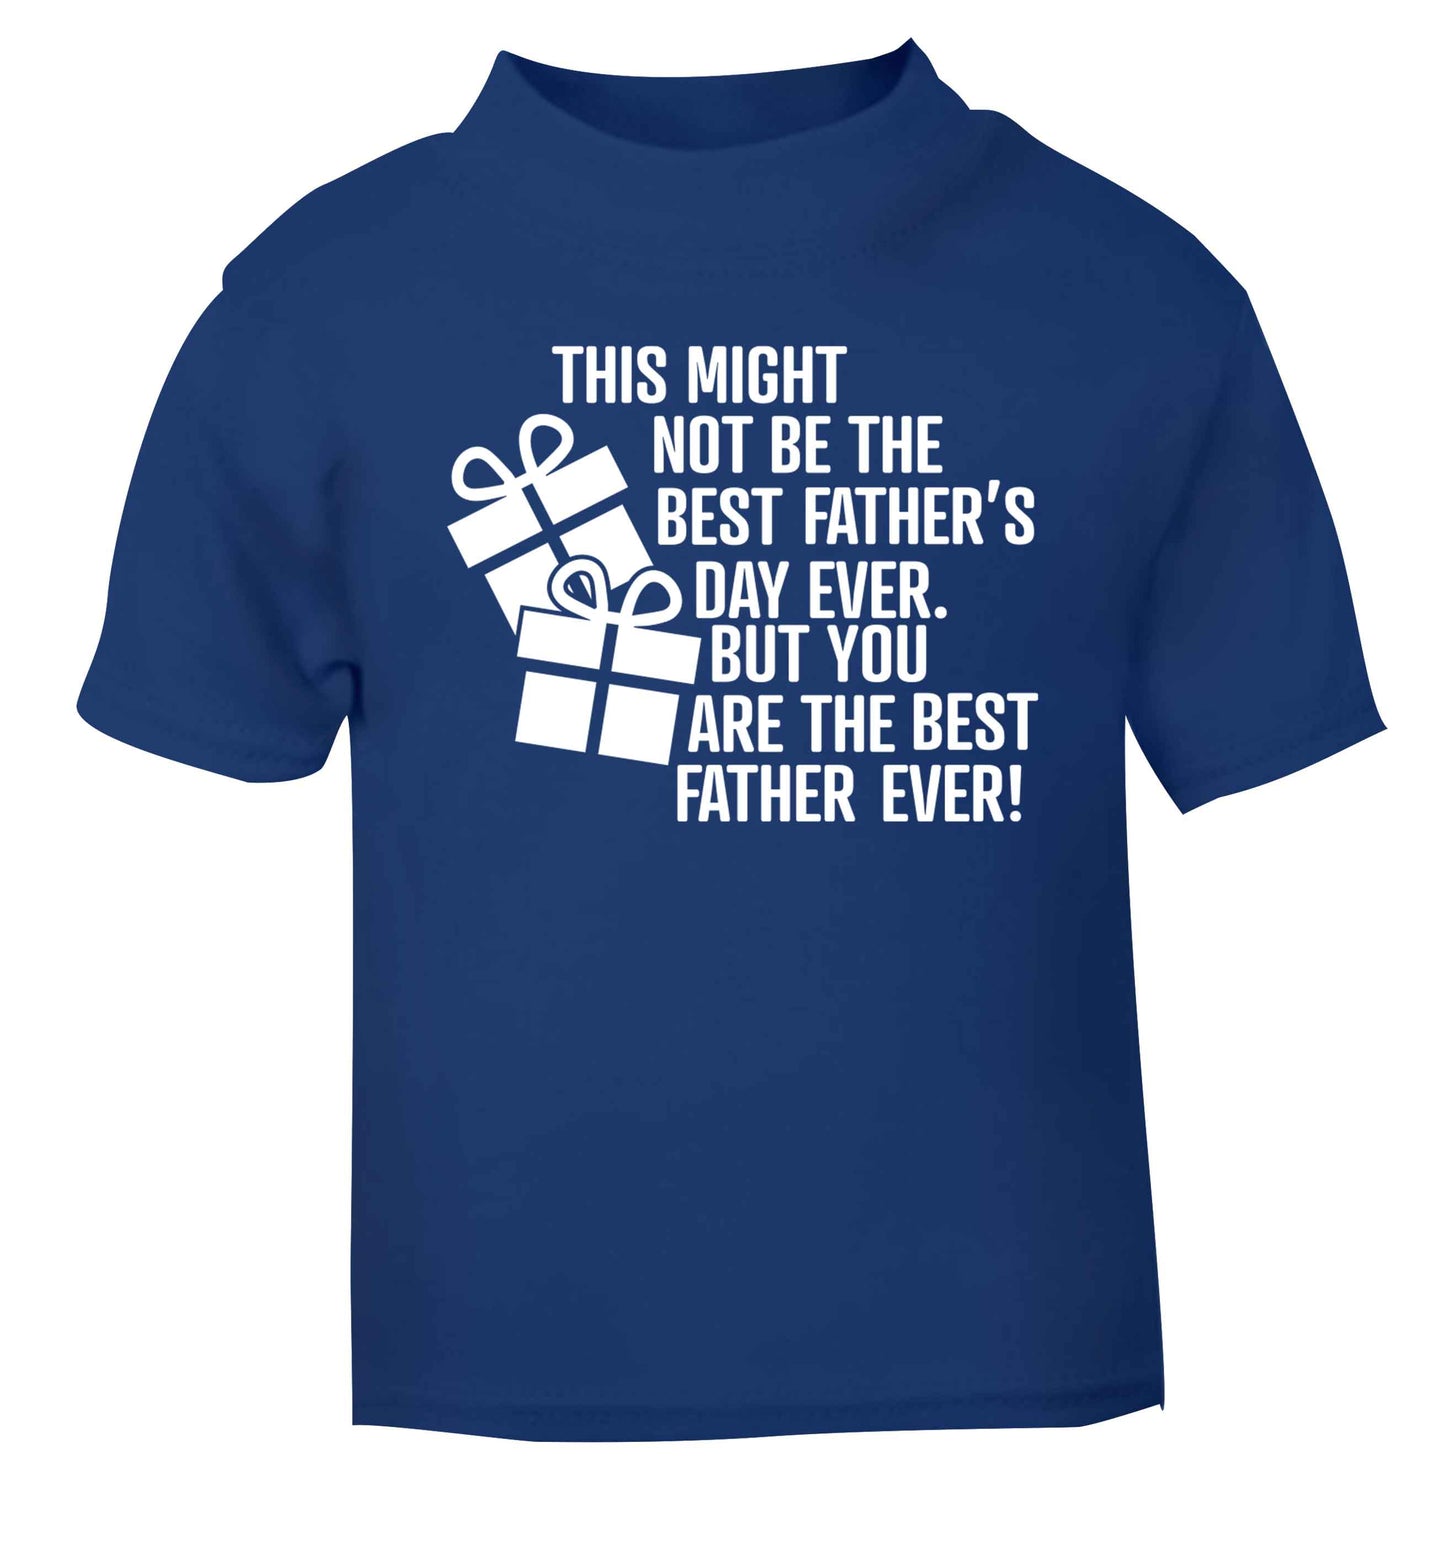 It might not be the best Father's Day ever but you are the best father ever! blue baby toddler Tshirt 2 Years